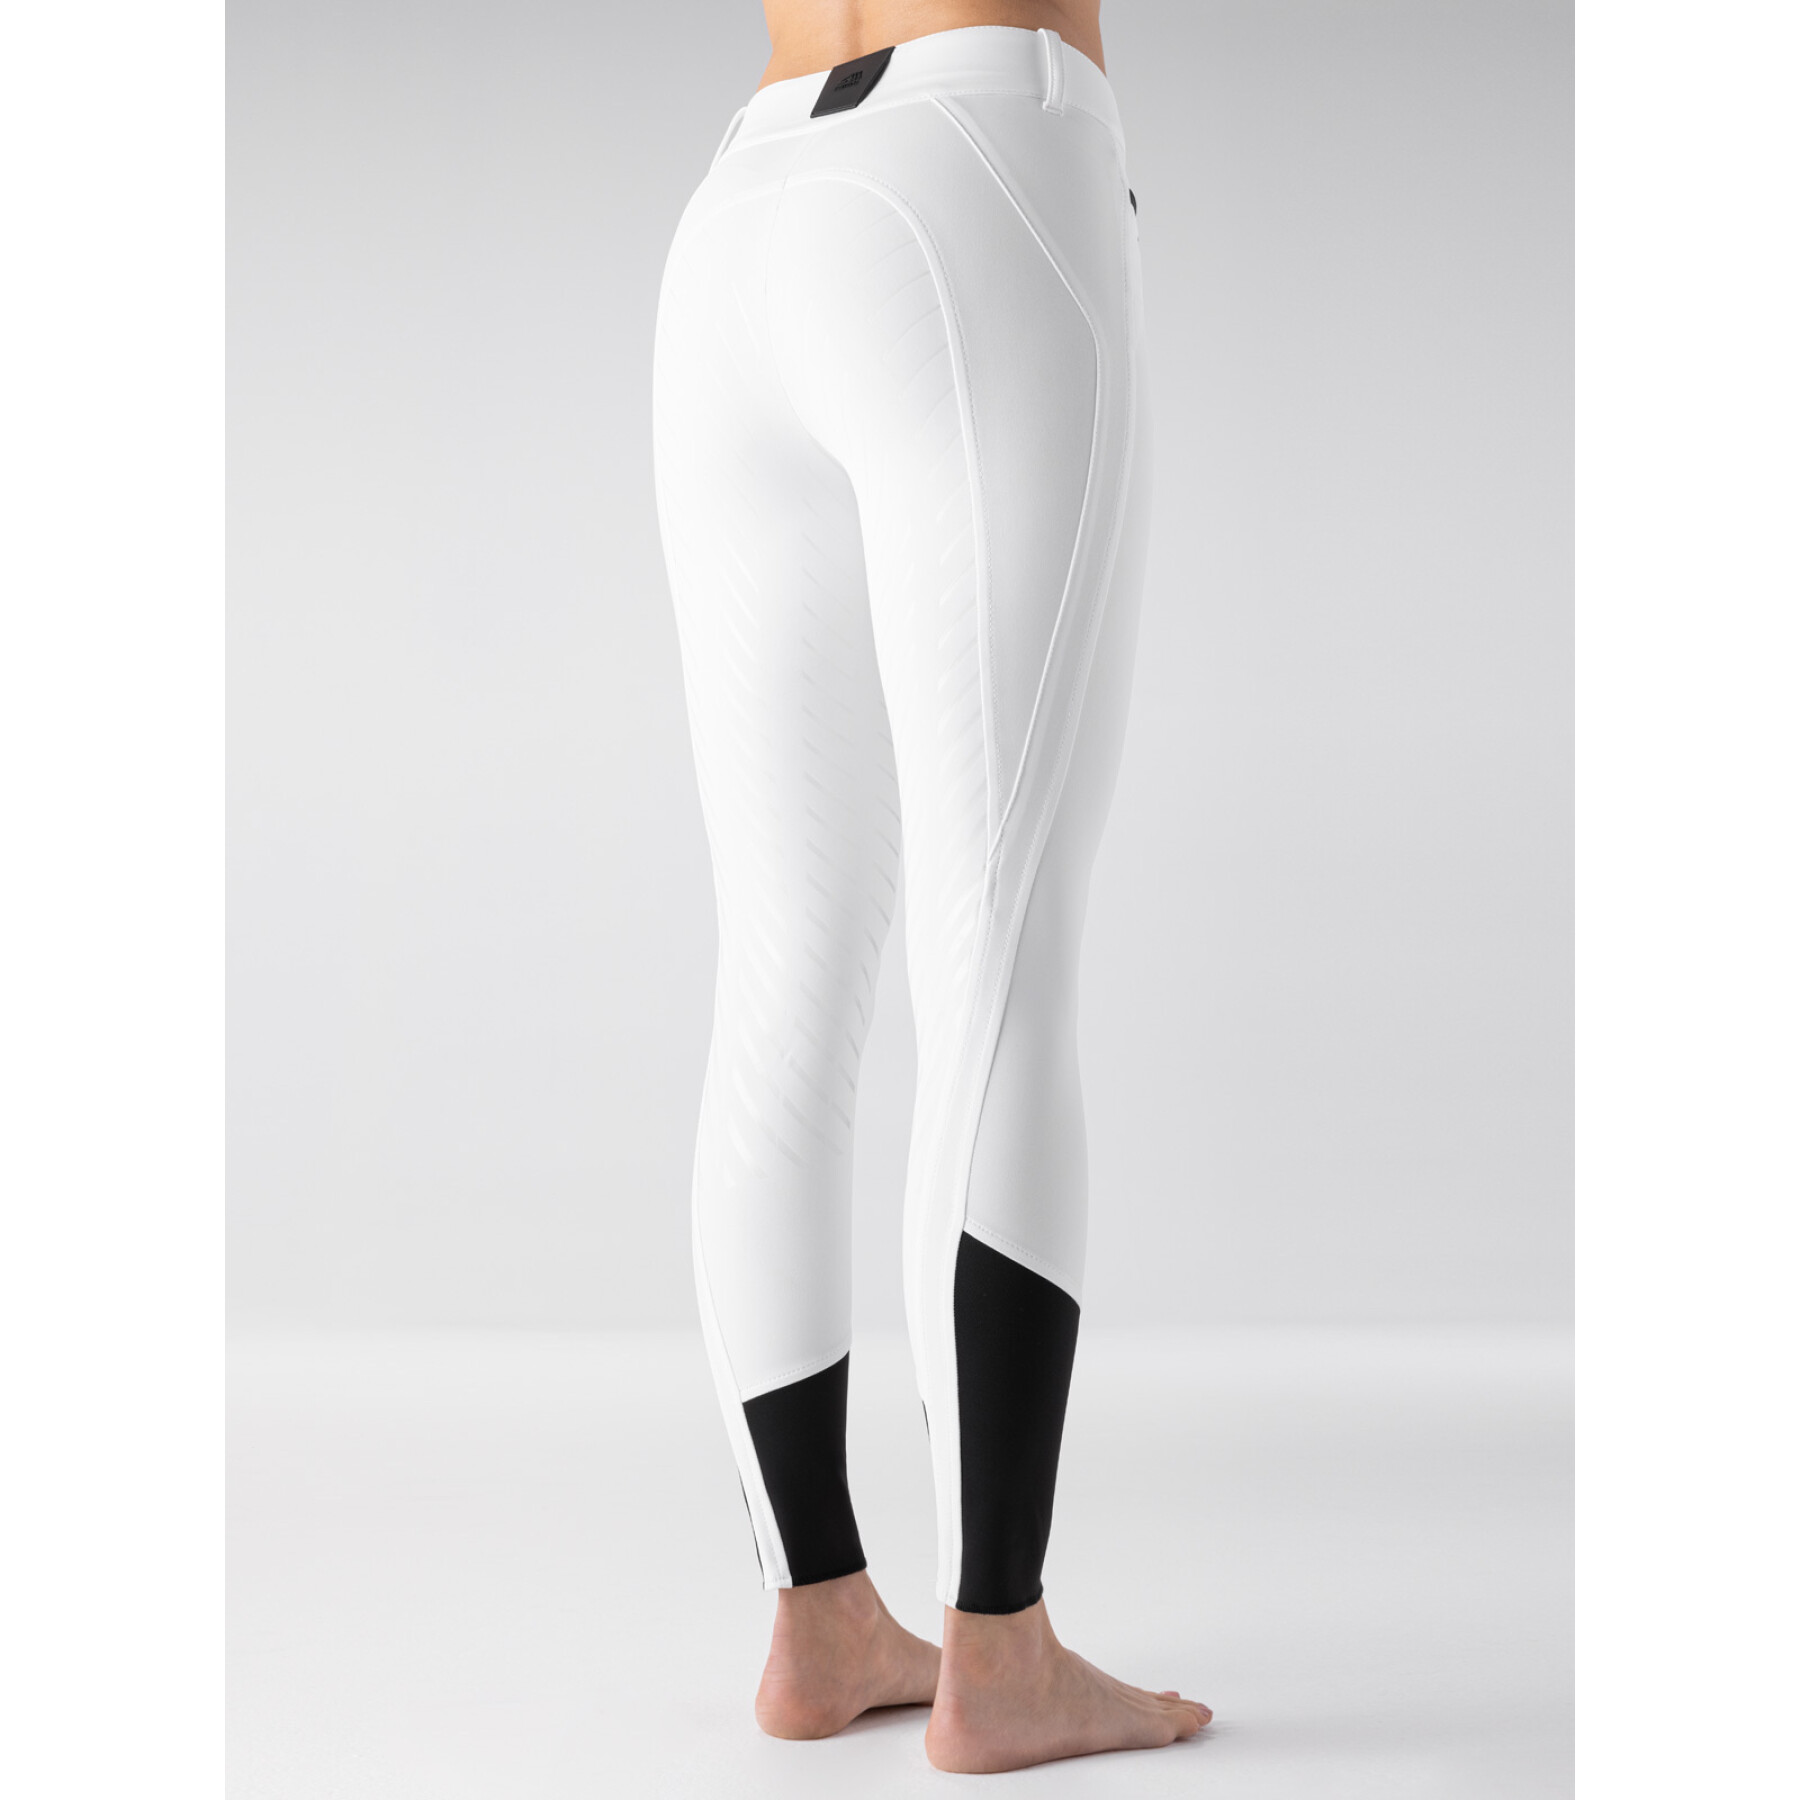 Women's mid grip competition pants Equiline